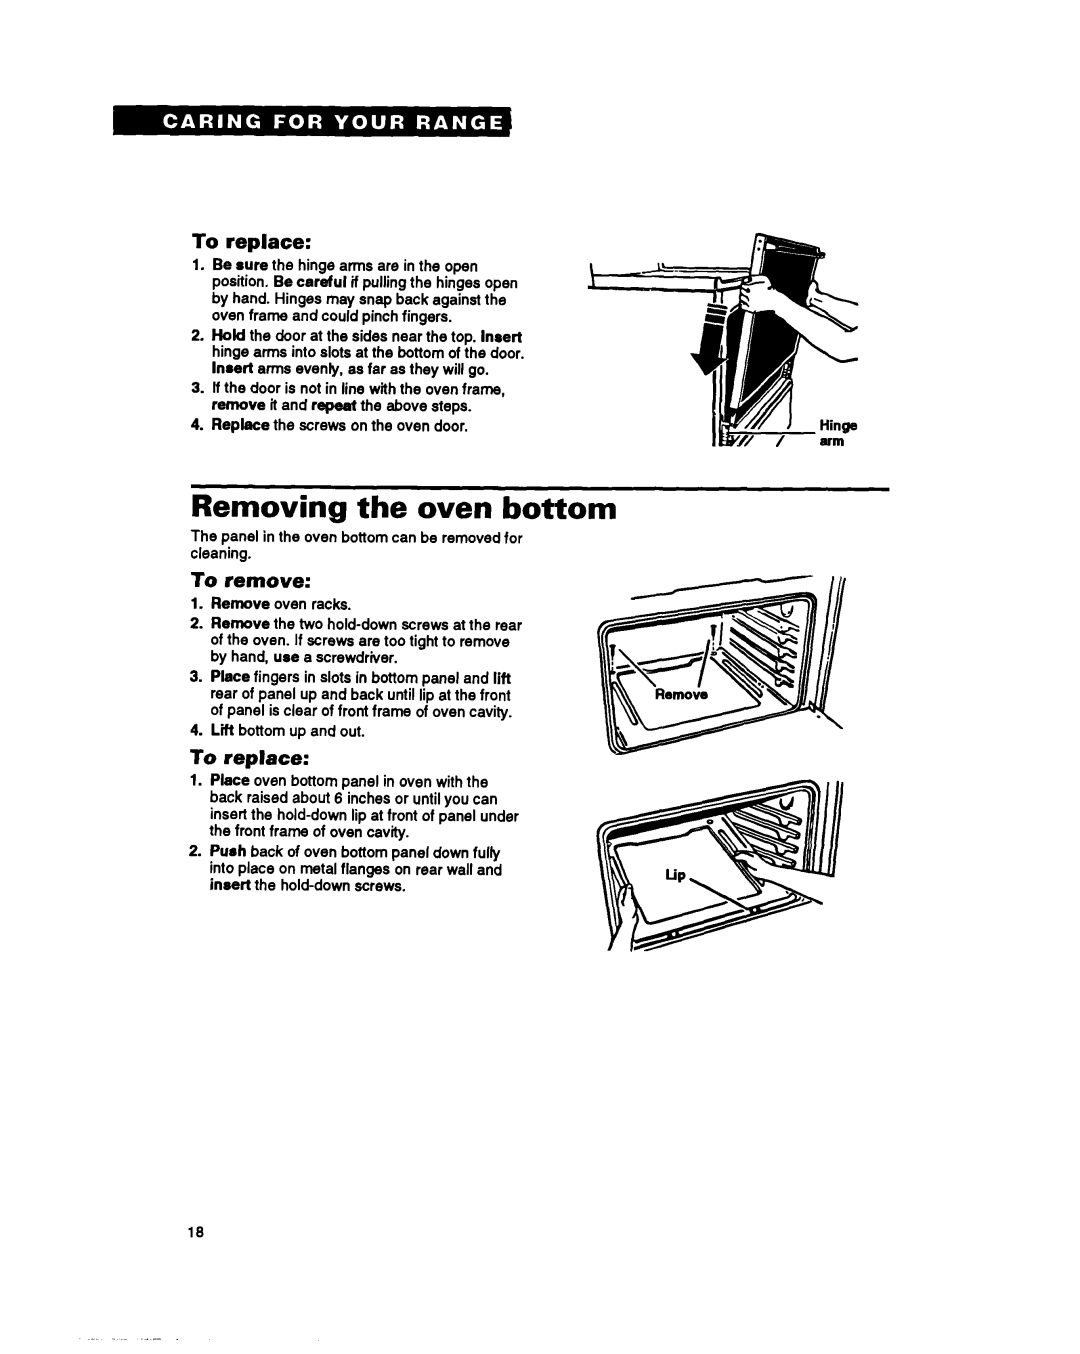 Whirlpool FGP357Y warranty Removing the oven bottom, To replace, To remove, To reprace 